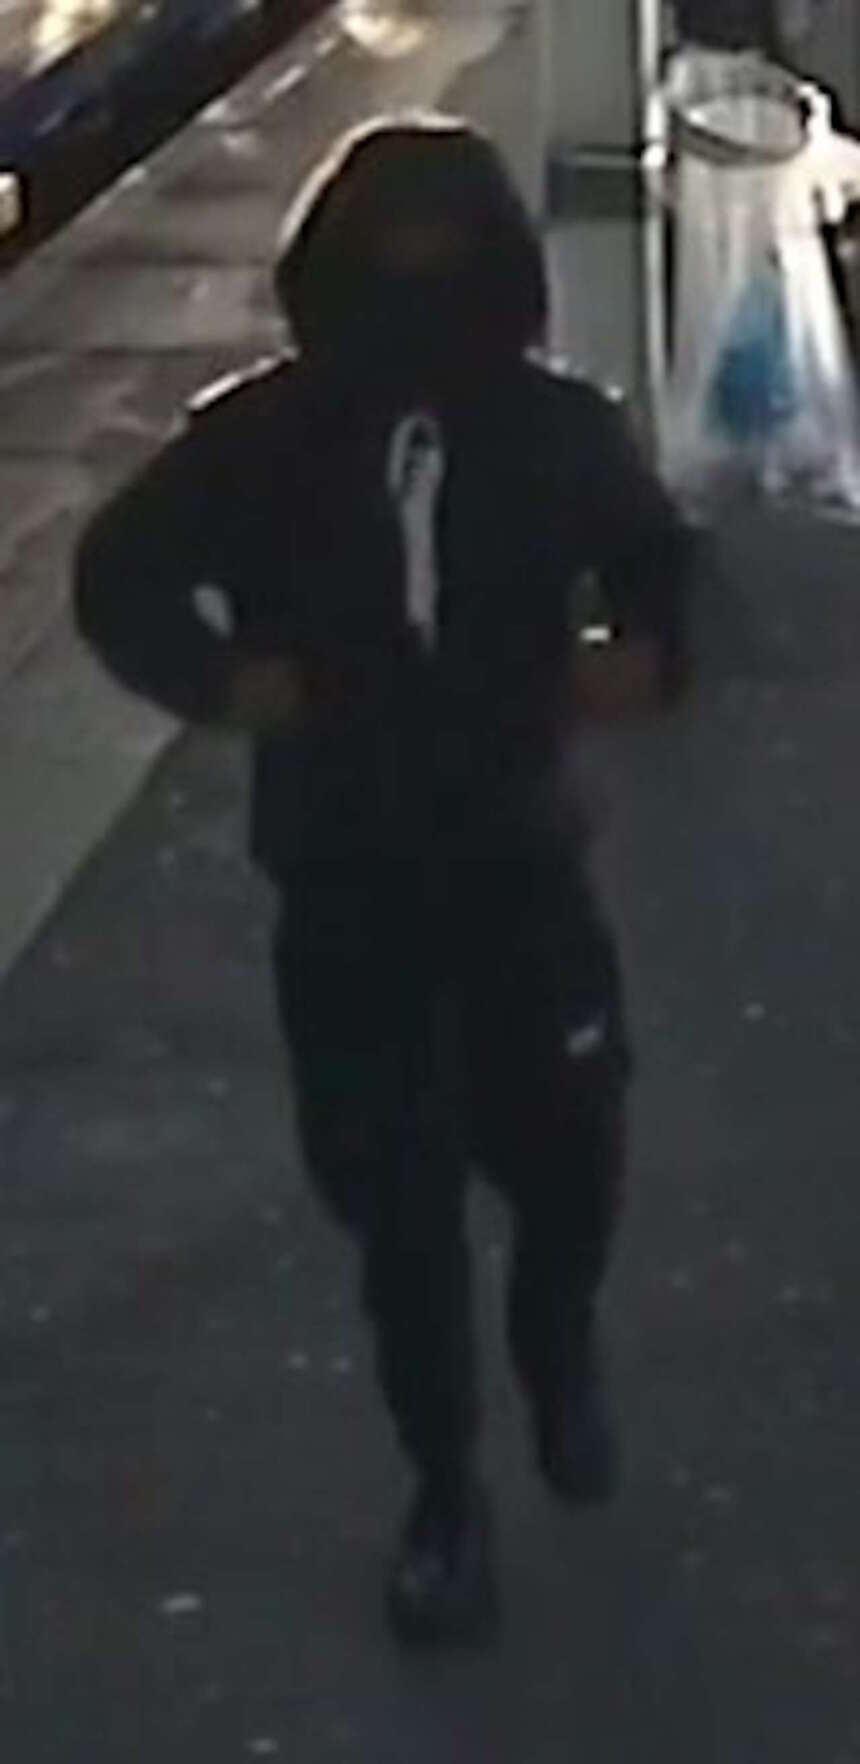 CCTV images released following robbery - Peckham Rye